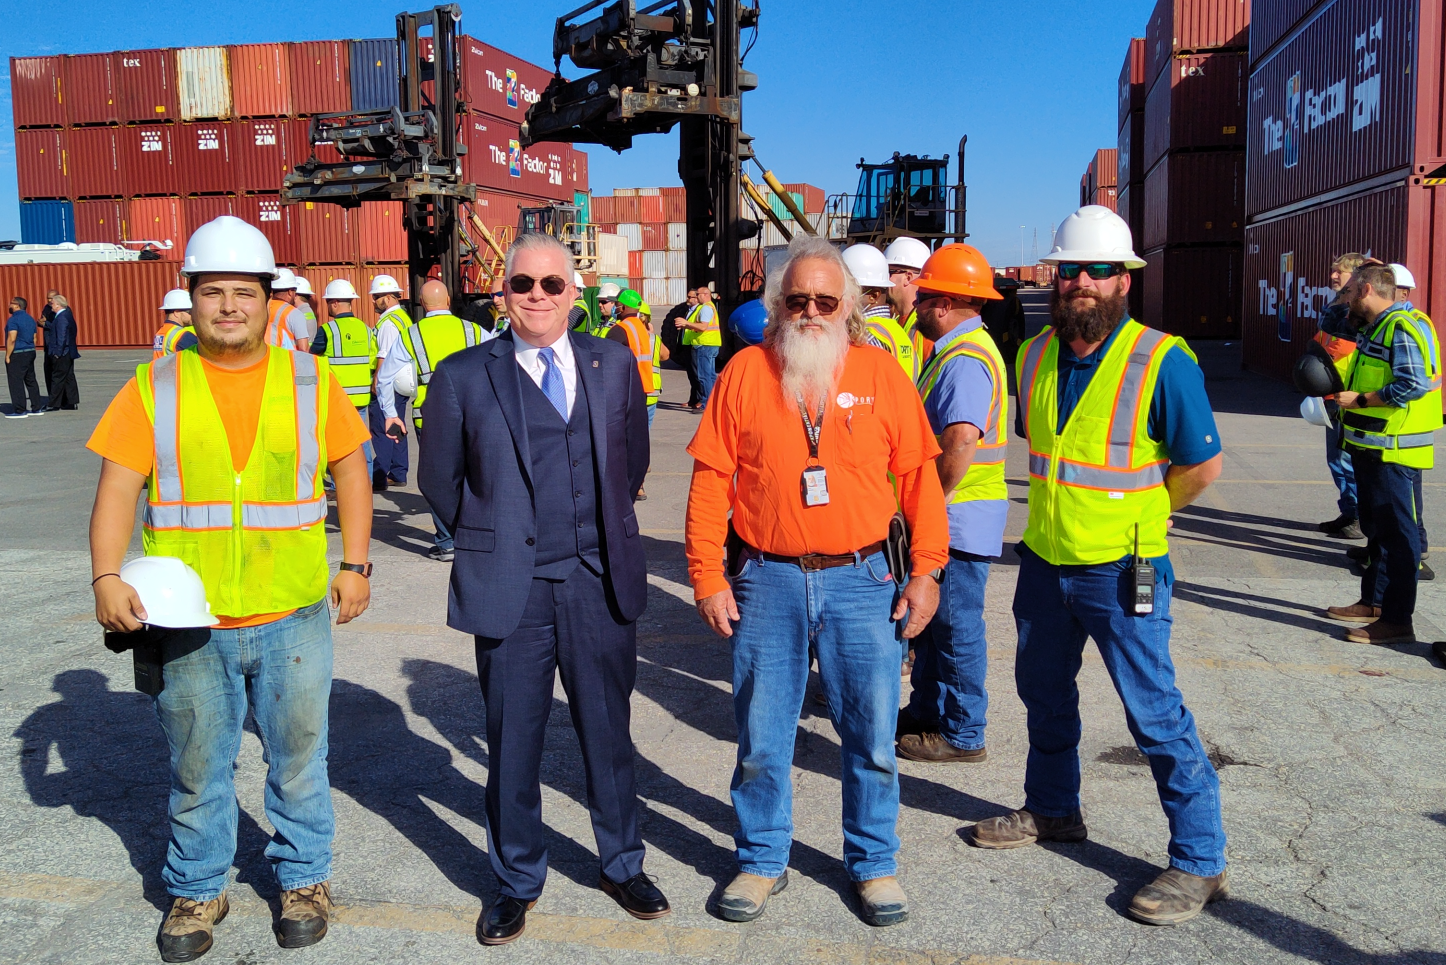 AGX Freight Chief Operating Officer Ike Sherlock, second from left, with workers at JaxPort.